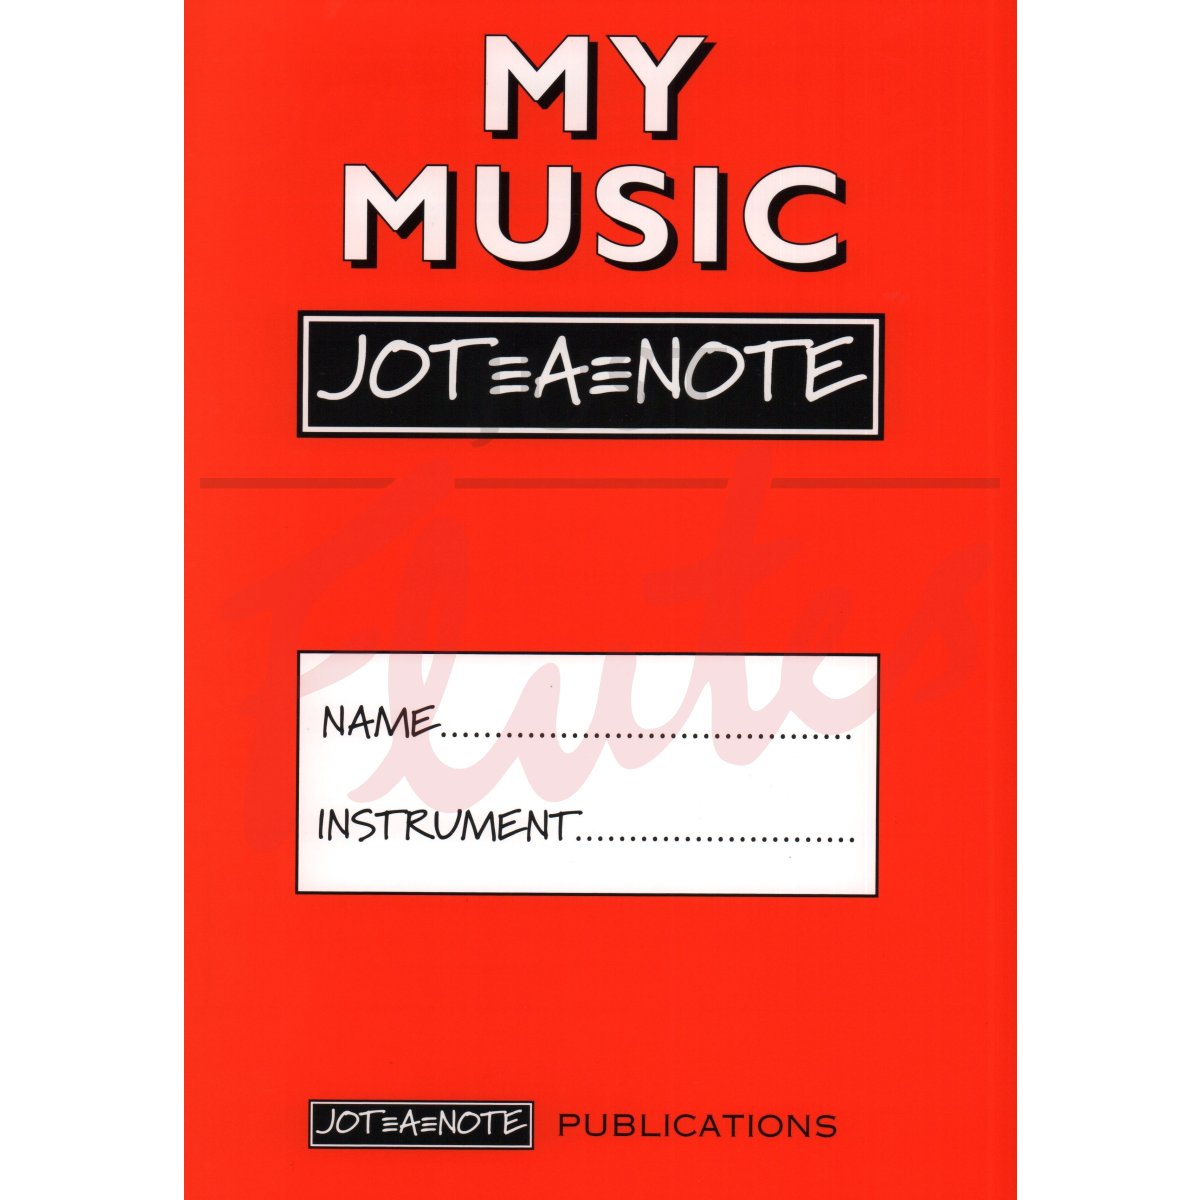 My Music Jot-A-Note (A4 Red)